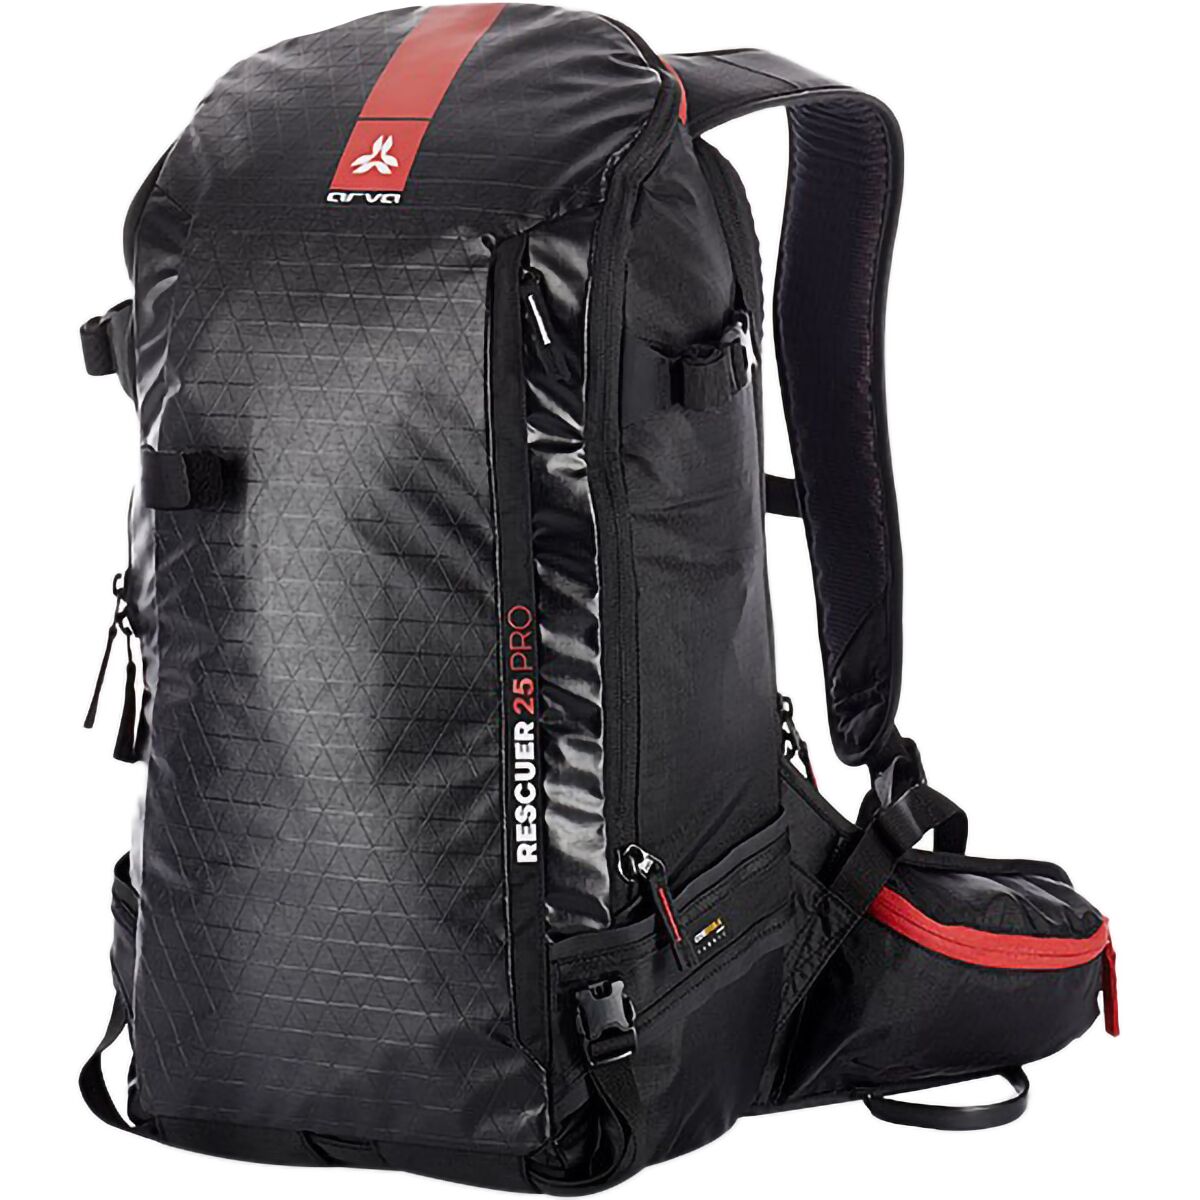 ARVA Rescuer Pro 25L Backpack